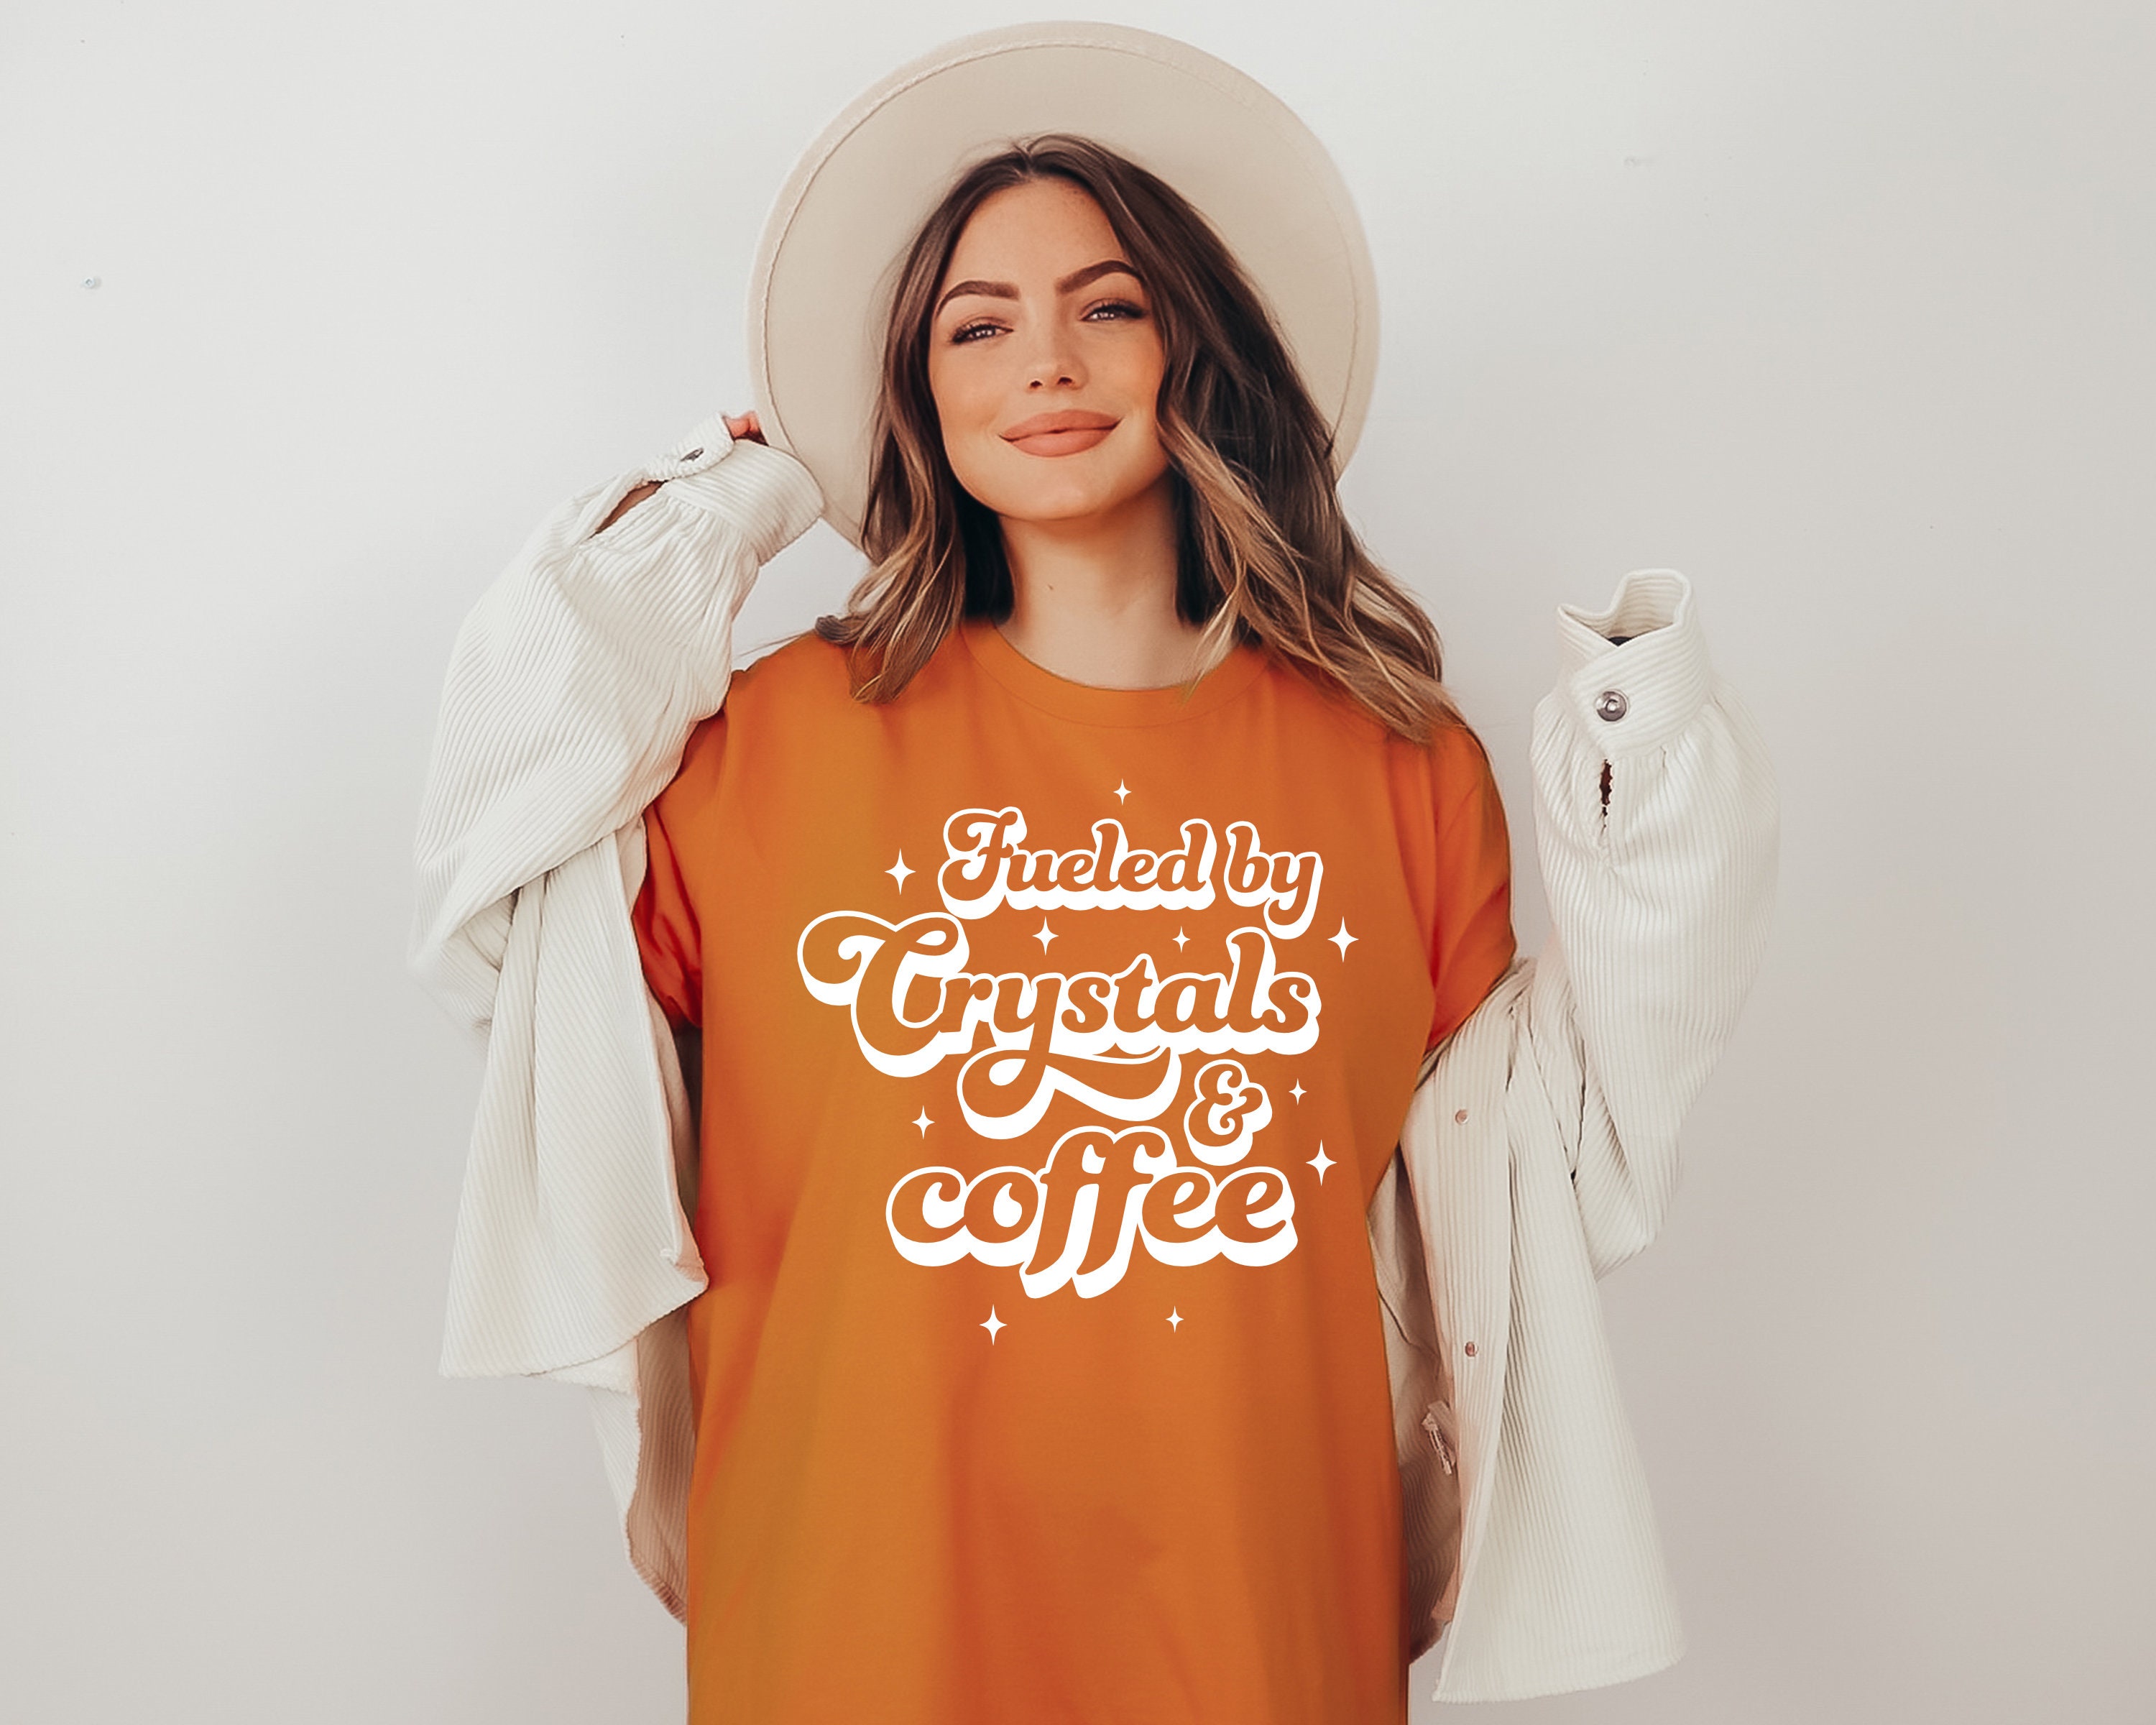 Fueled by Crystals and Coffee Svg Shirtbasic Witch - Etsy